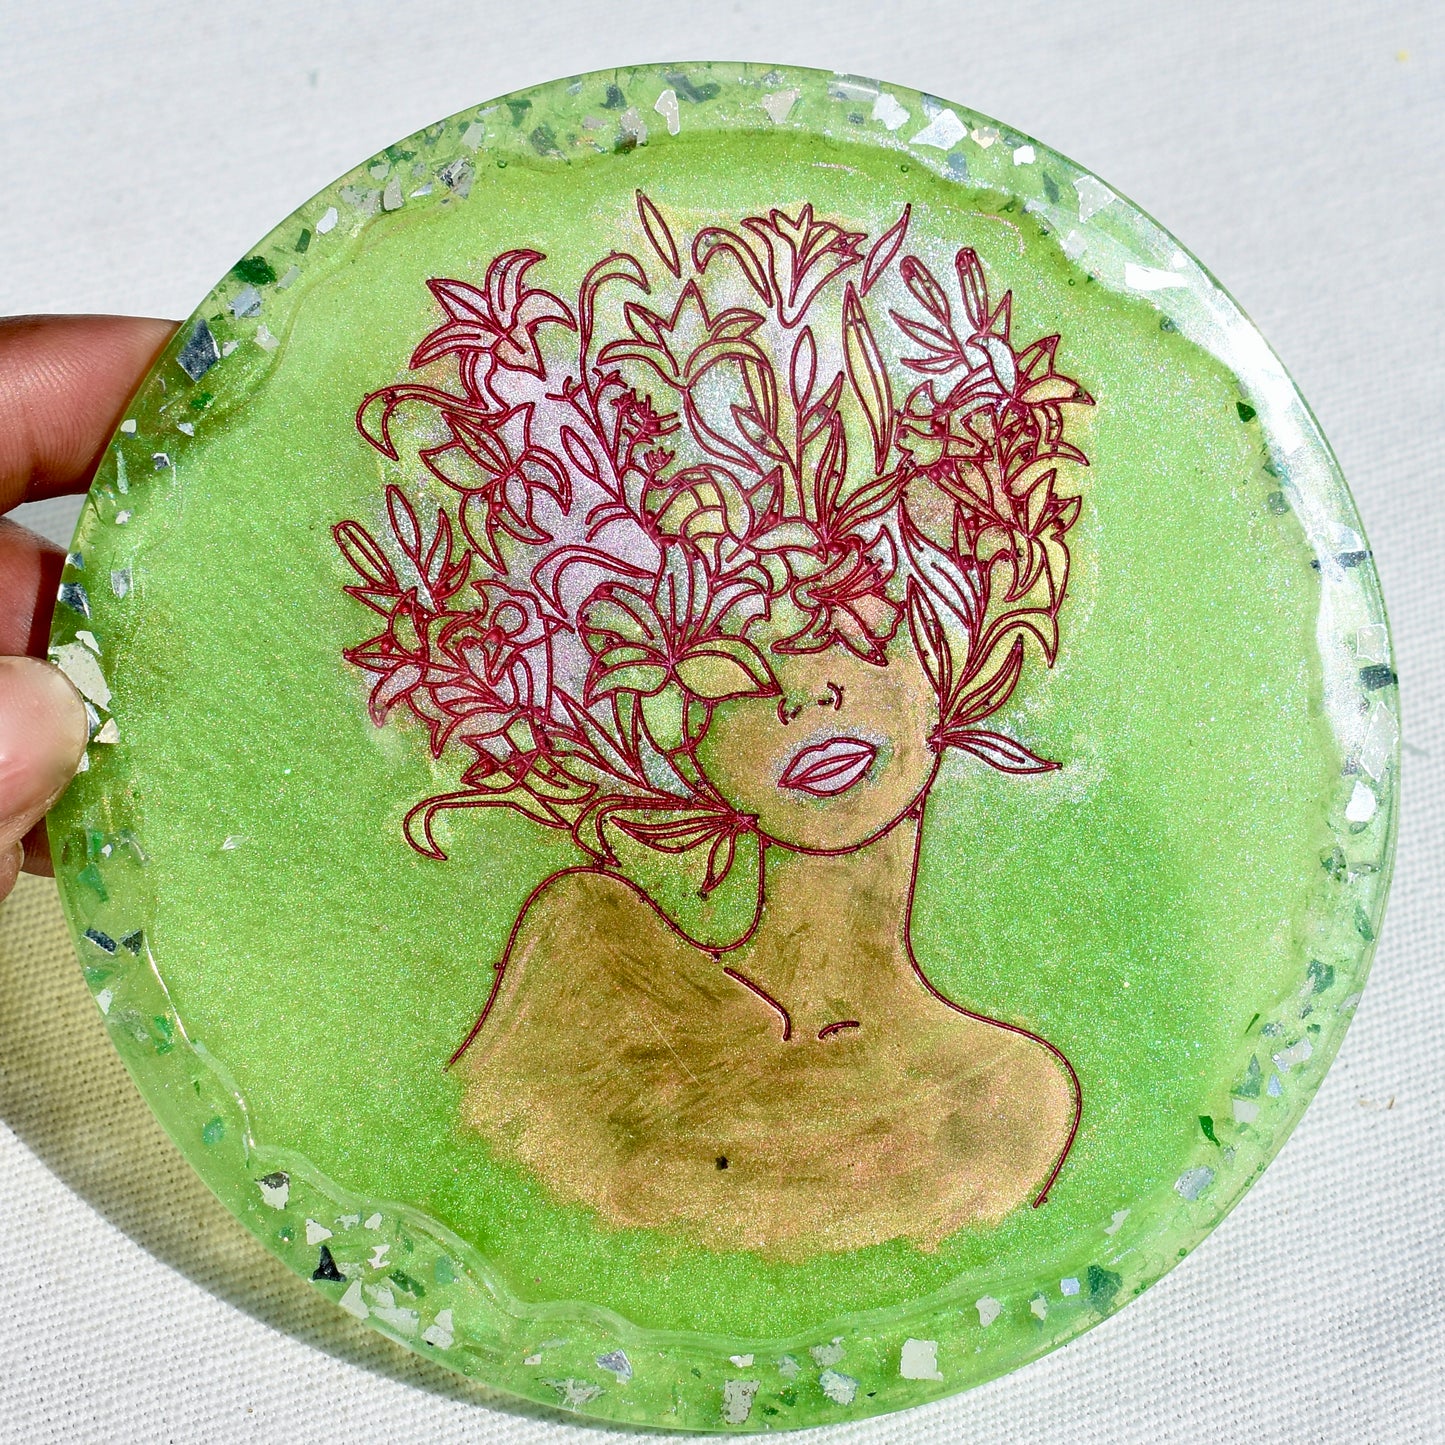 Female Floral Line Art Coasters • Women’s History Month Coasters • Shero Coasters (Asst. Colors)